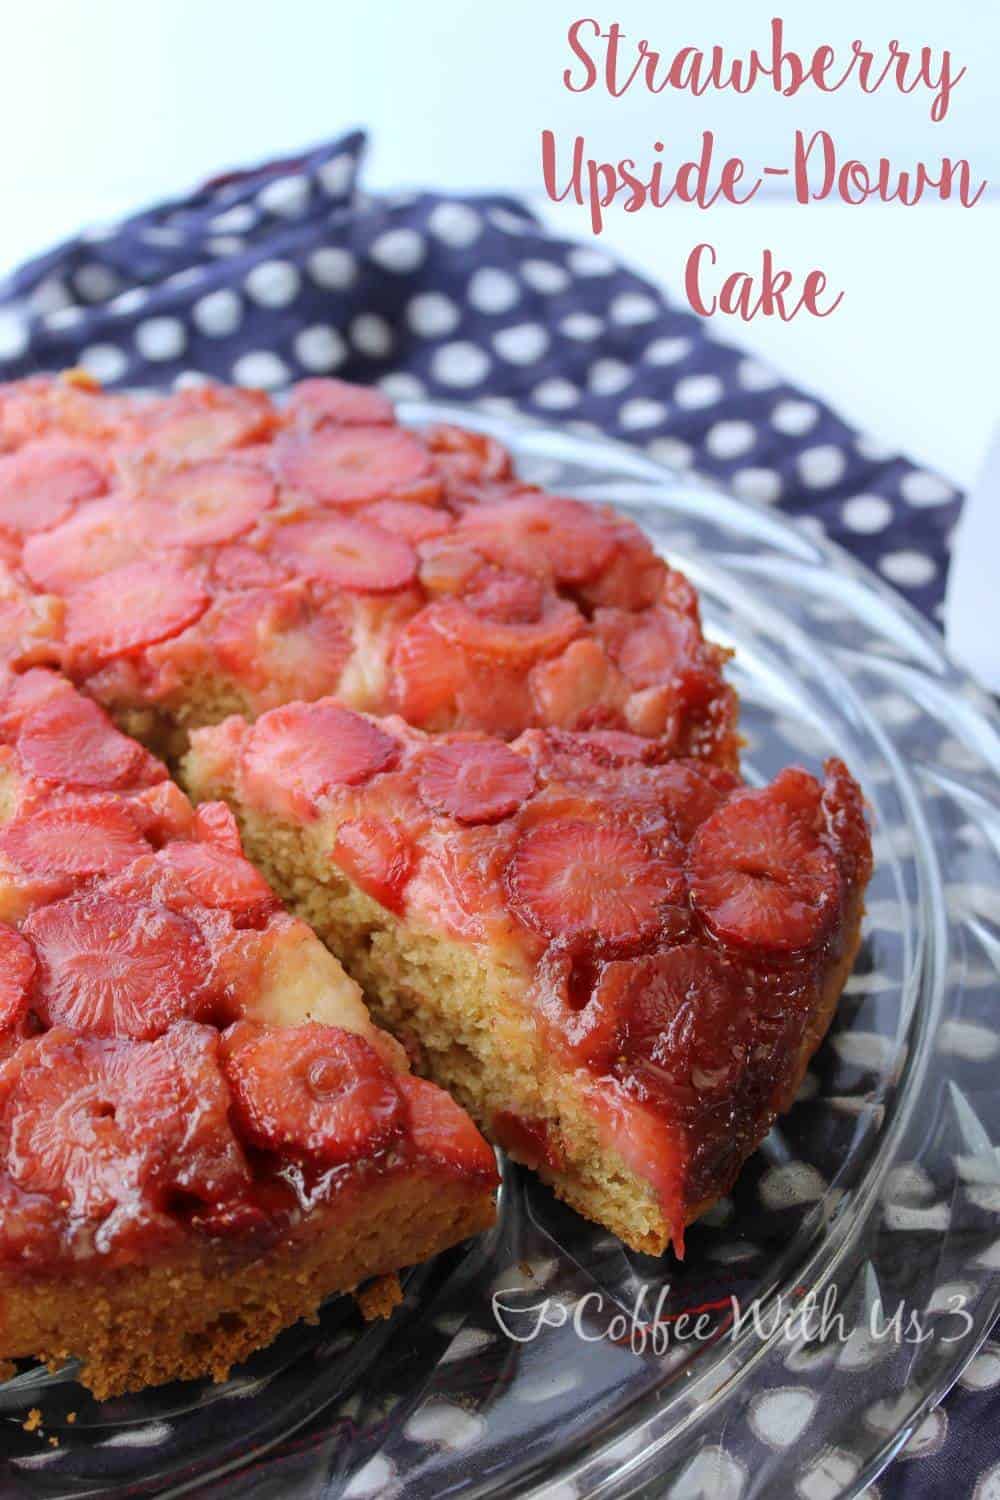 Made from scratch Strawberry Upside-Down Cake from Coffee With Us 3